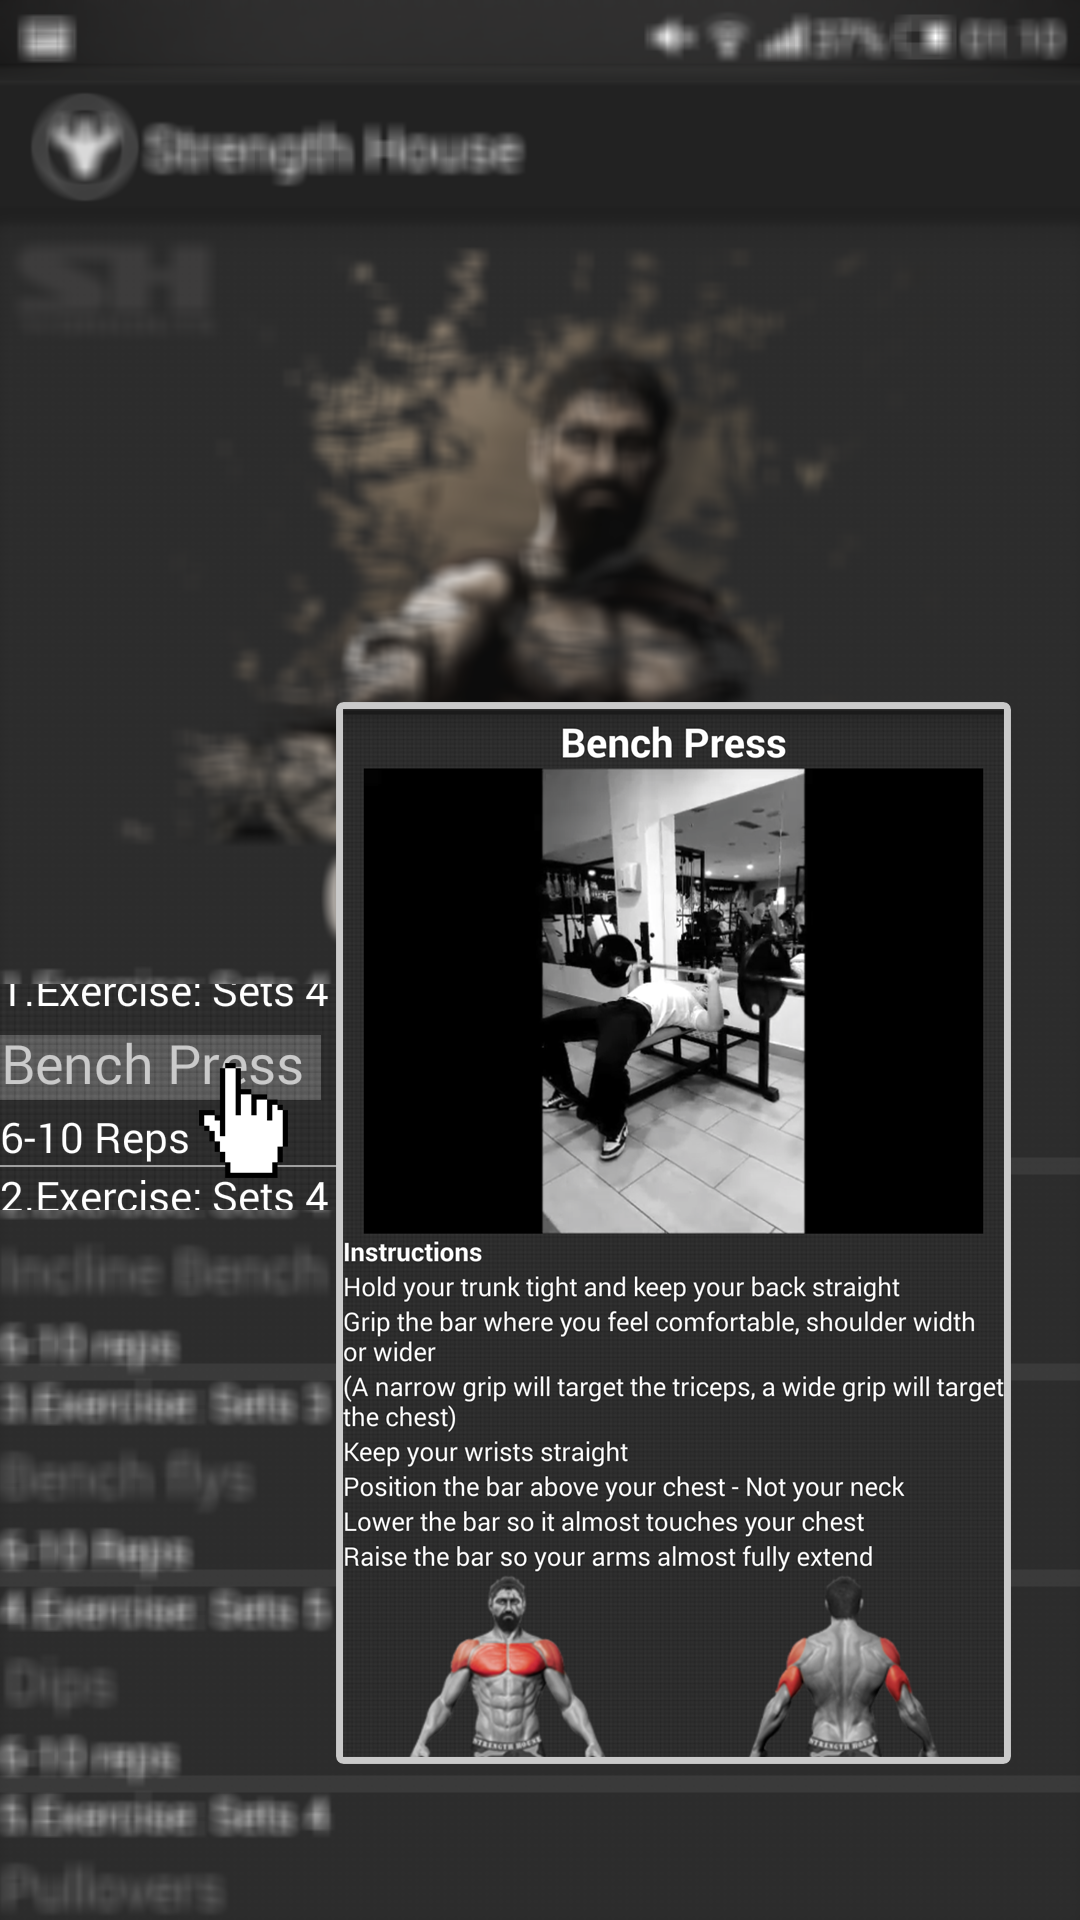 Android application Strength House - GYM Workouts 1RM screenshort